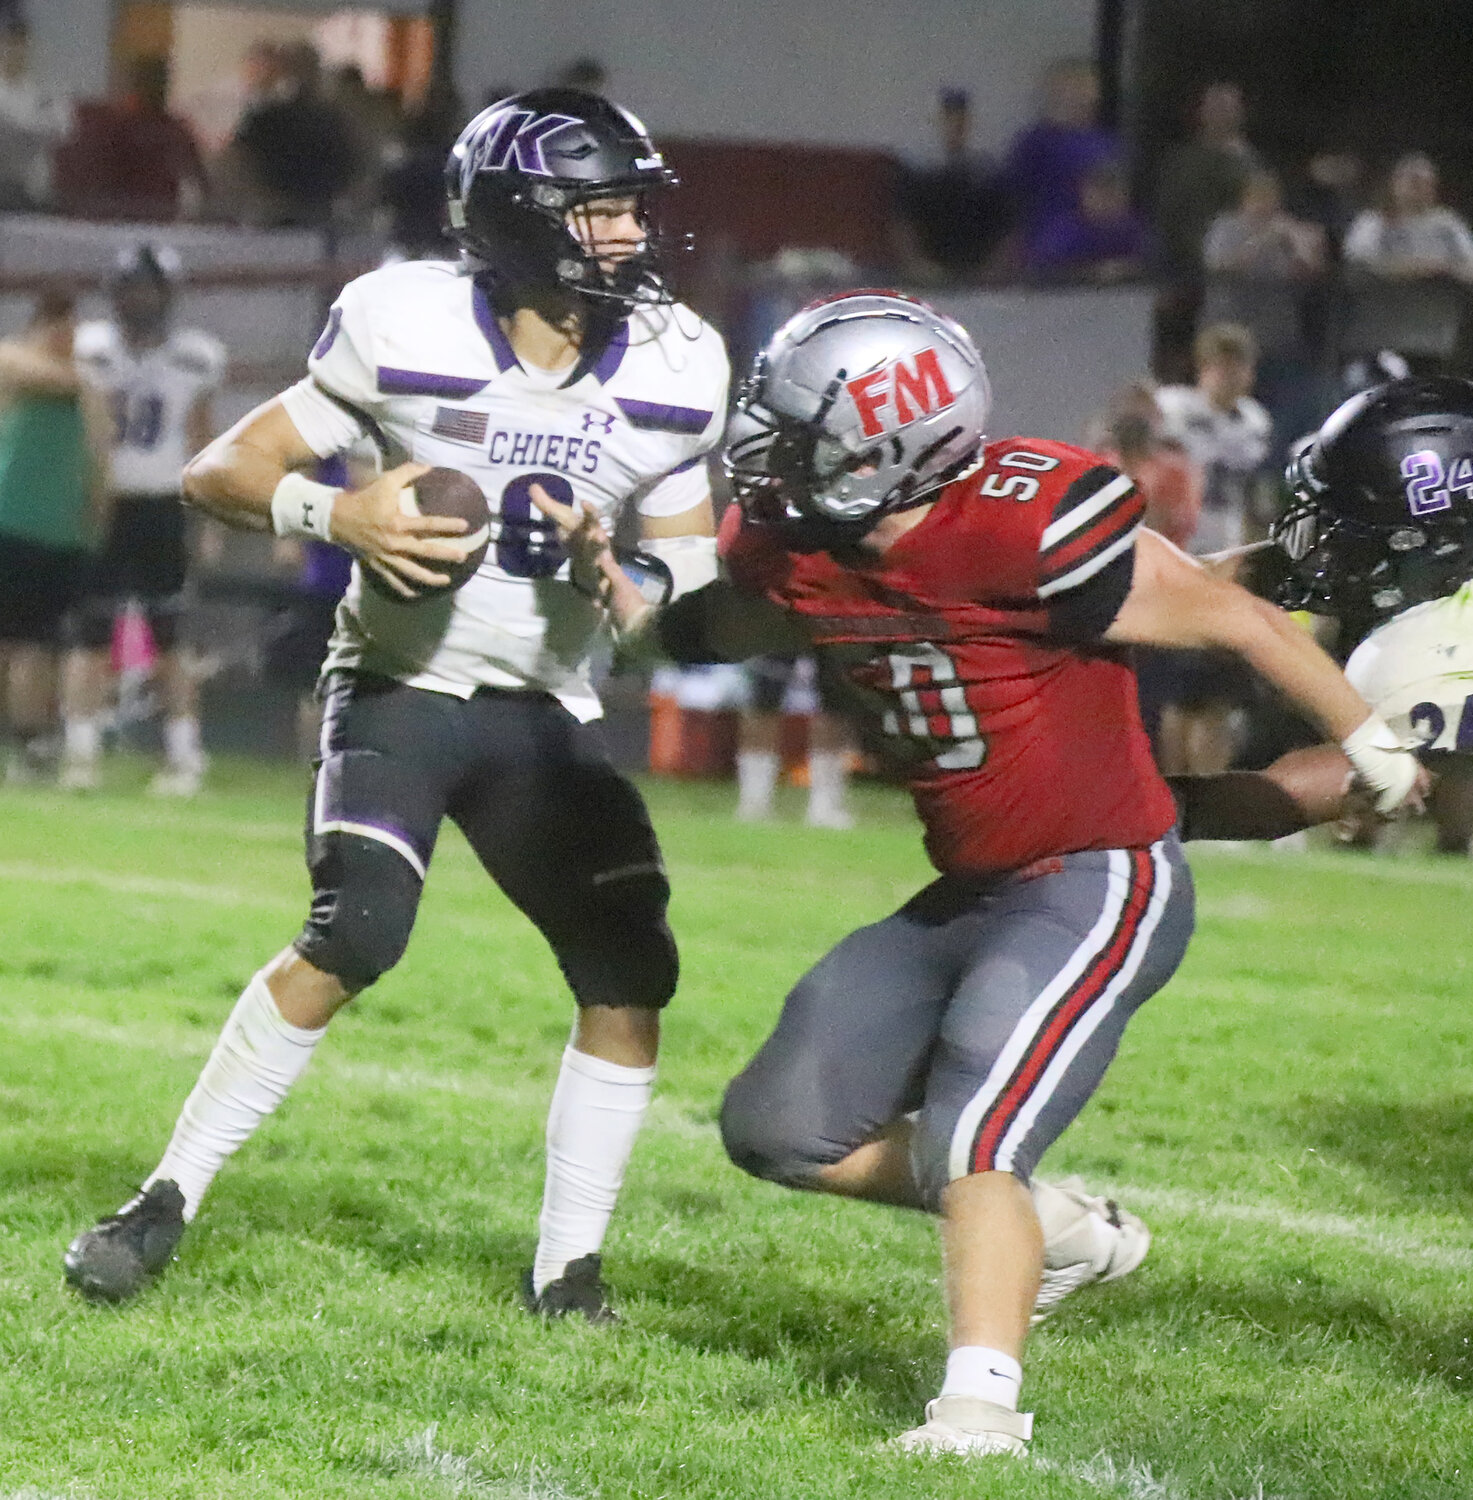 Senior Ike Thacher gives chase to Fort Madison's Brenton Hoard in the first quarter of the Hounds' win Friday night.